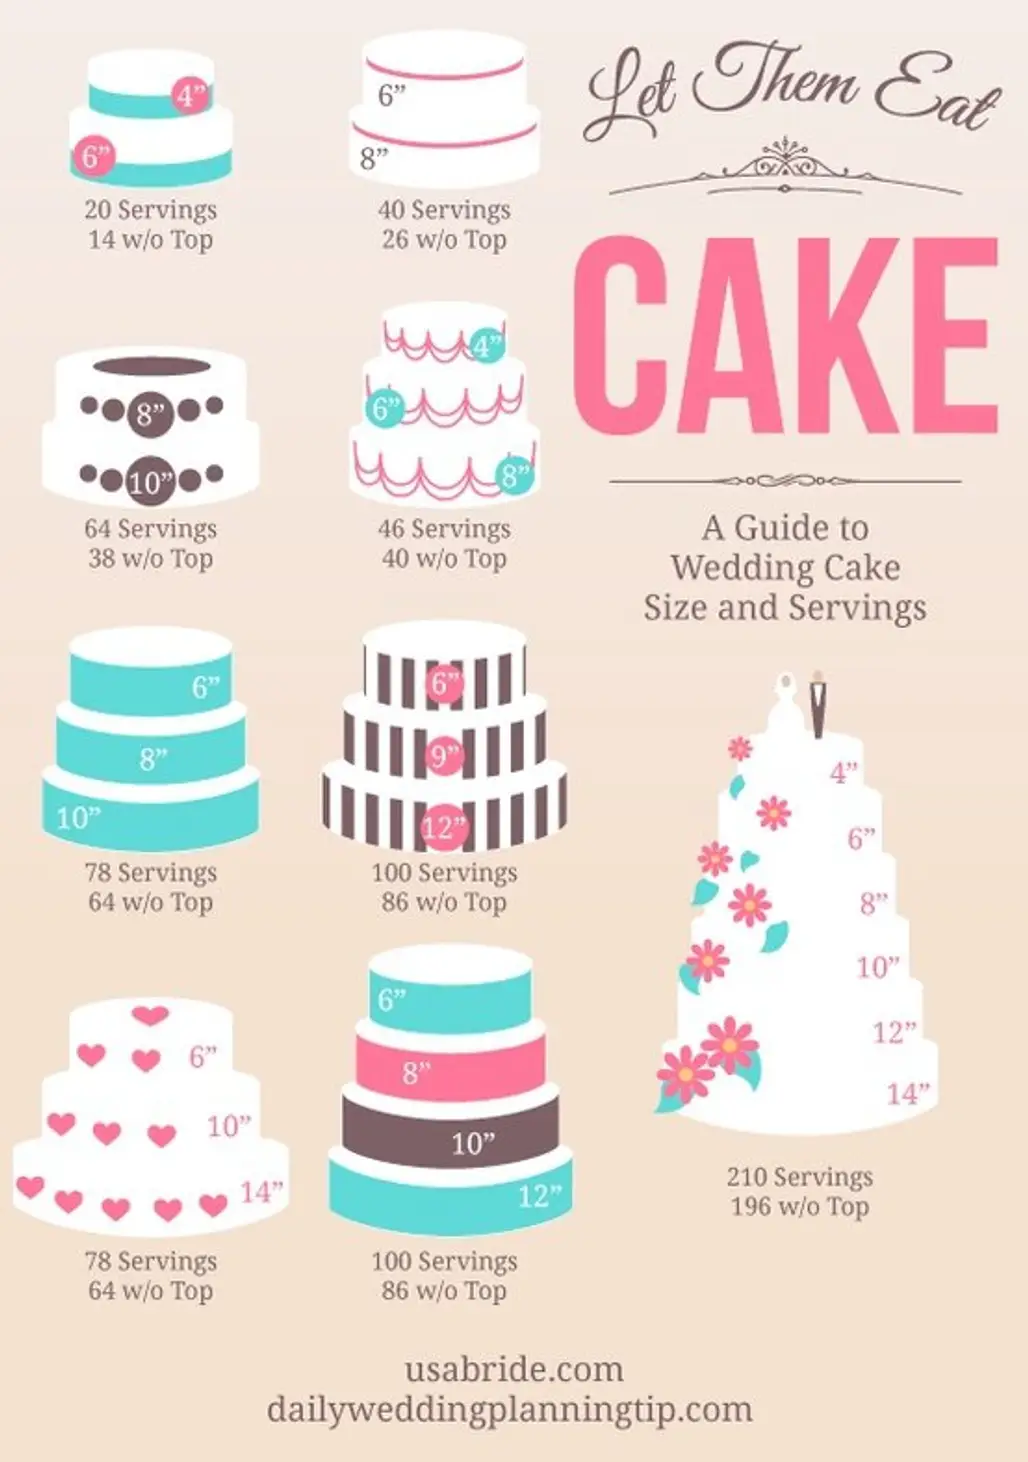 Everything You Need to Choose a Cake